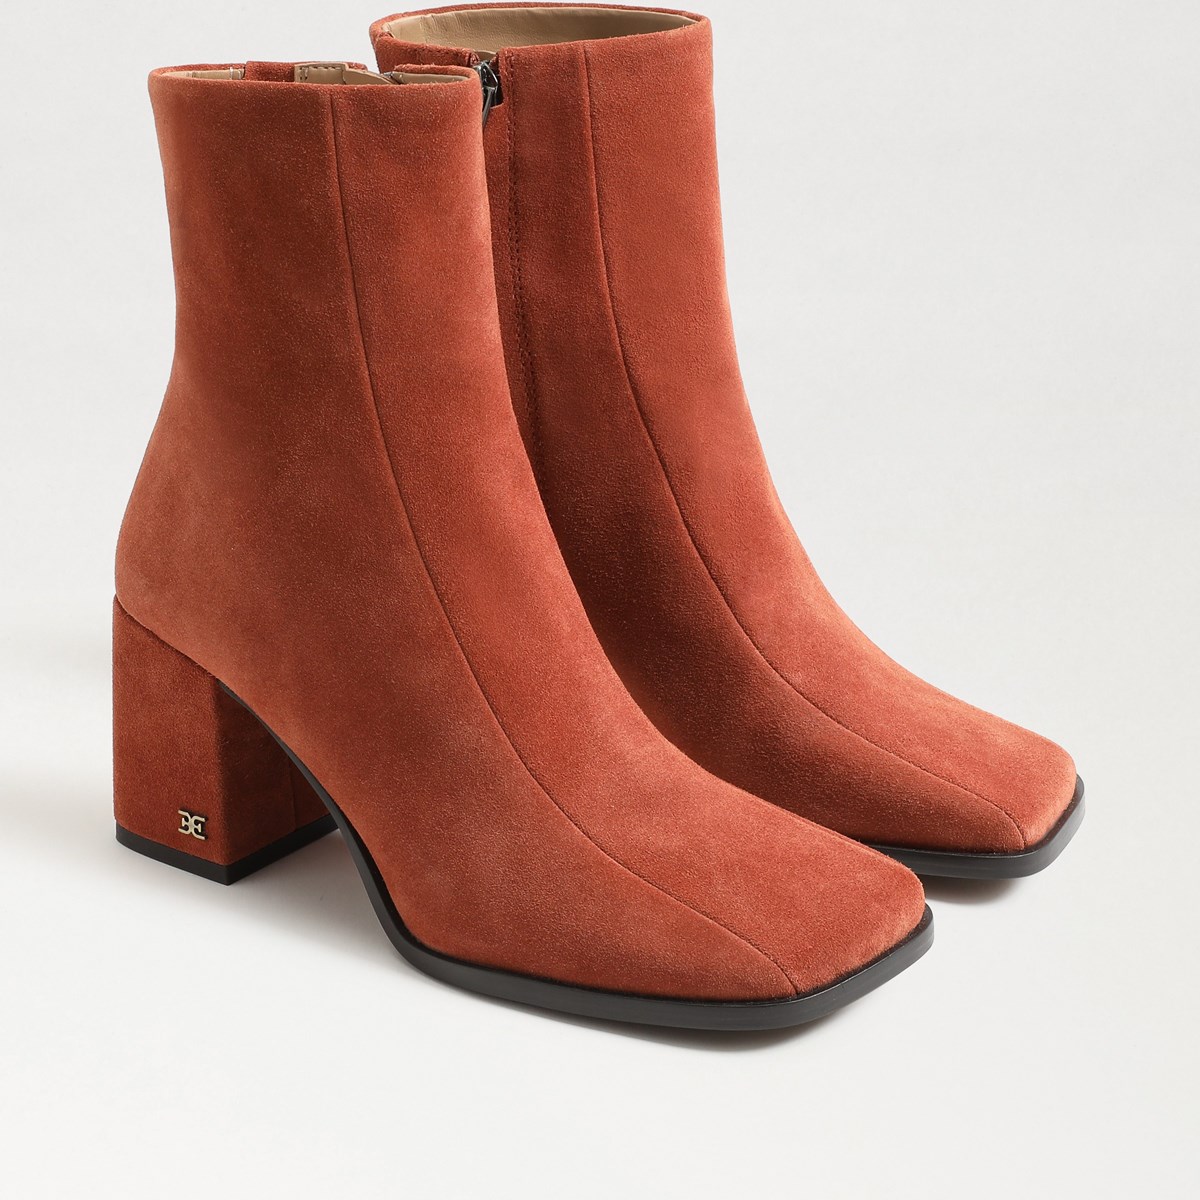 Encommium Put together Compound Sam Edelman Mayla Ankle Boot | Womens Boots and Booties